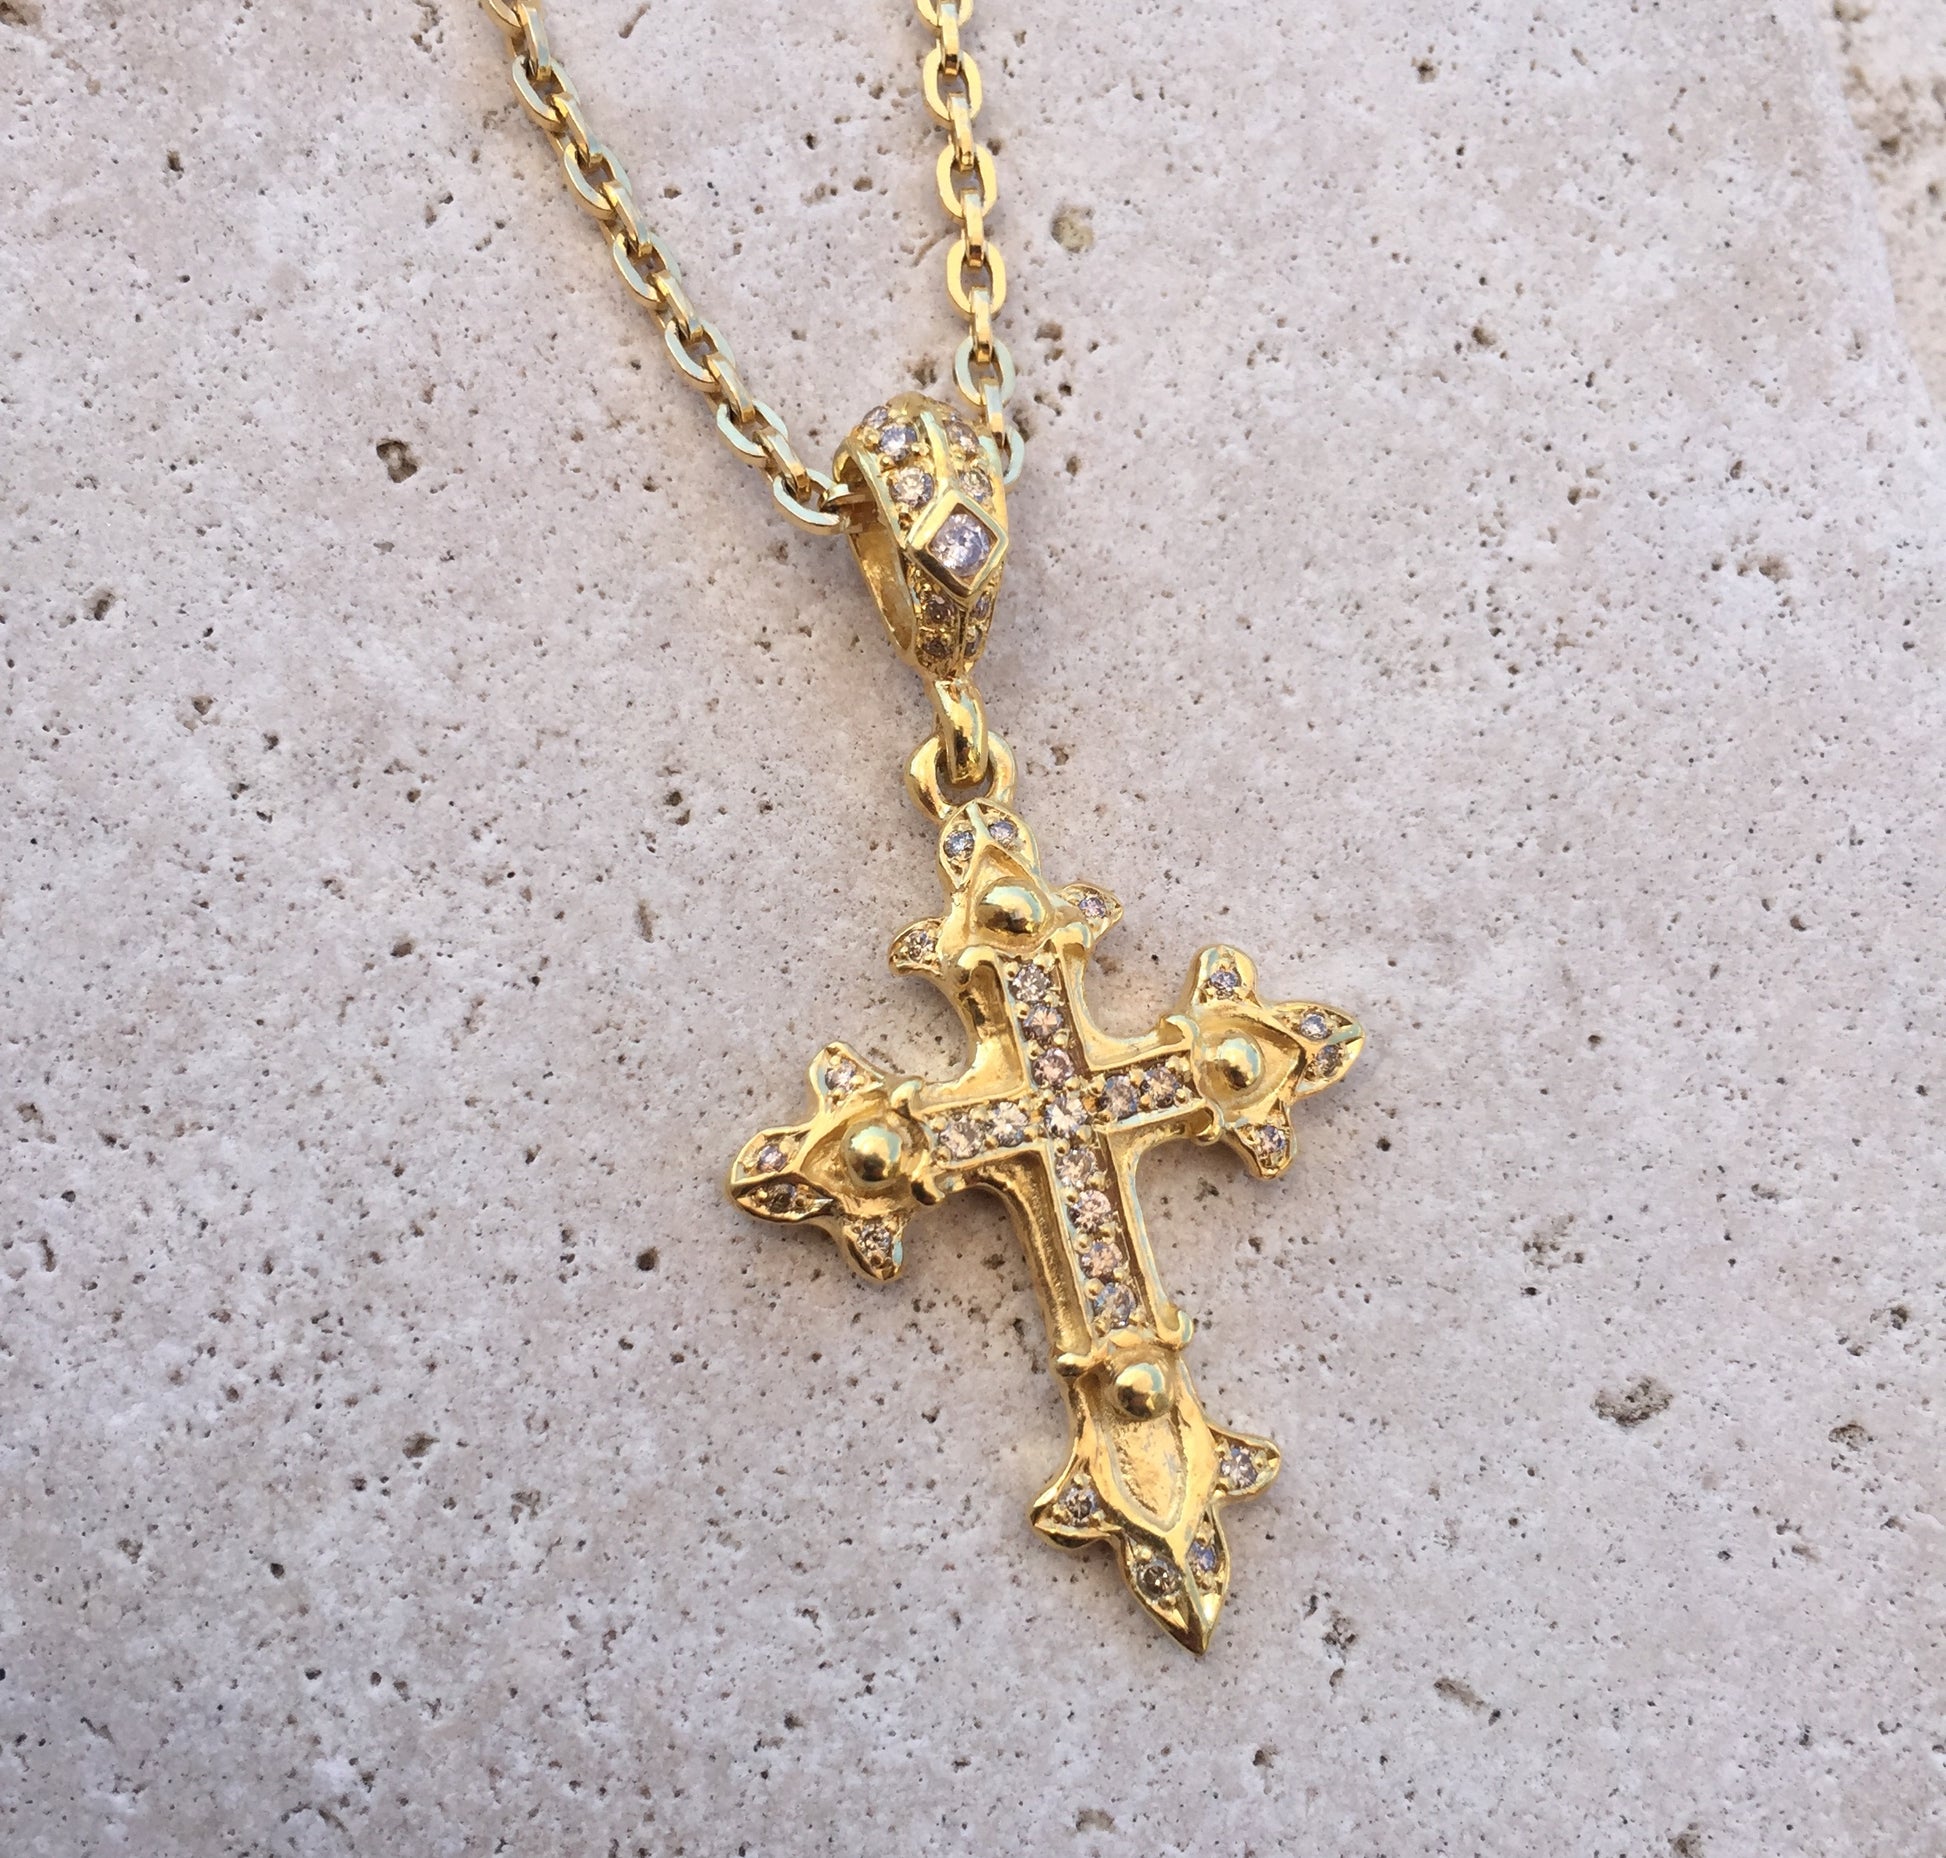 Necklace - Golden Double Cross with Diamonds in sterling silver by Roman Paul